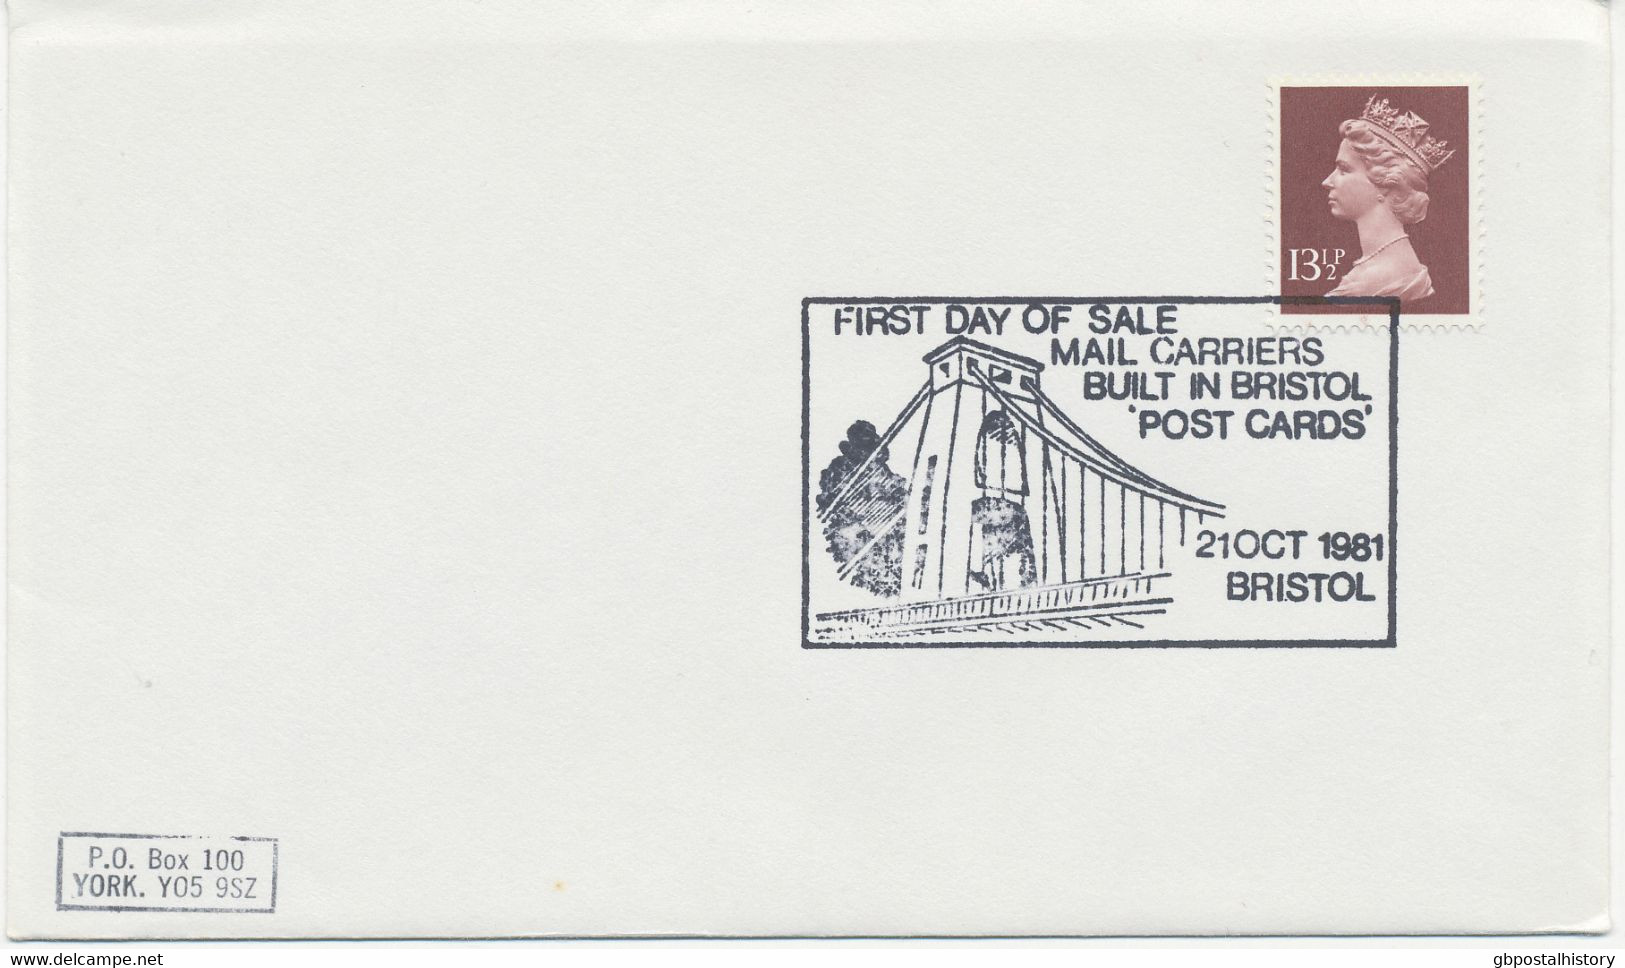 GB SPECIAL EVENT POSTMARK First Day Of Sale - Mail Carriers - Built In BRISTOL - 'POST CARDS' 21 Oct 1981 Bristol - Marcofilie